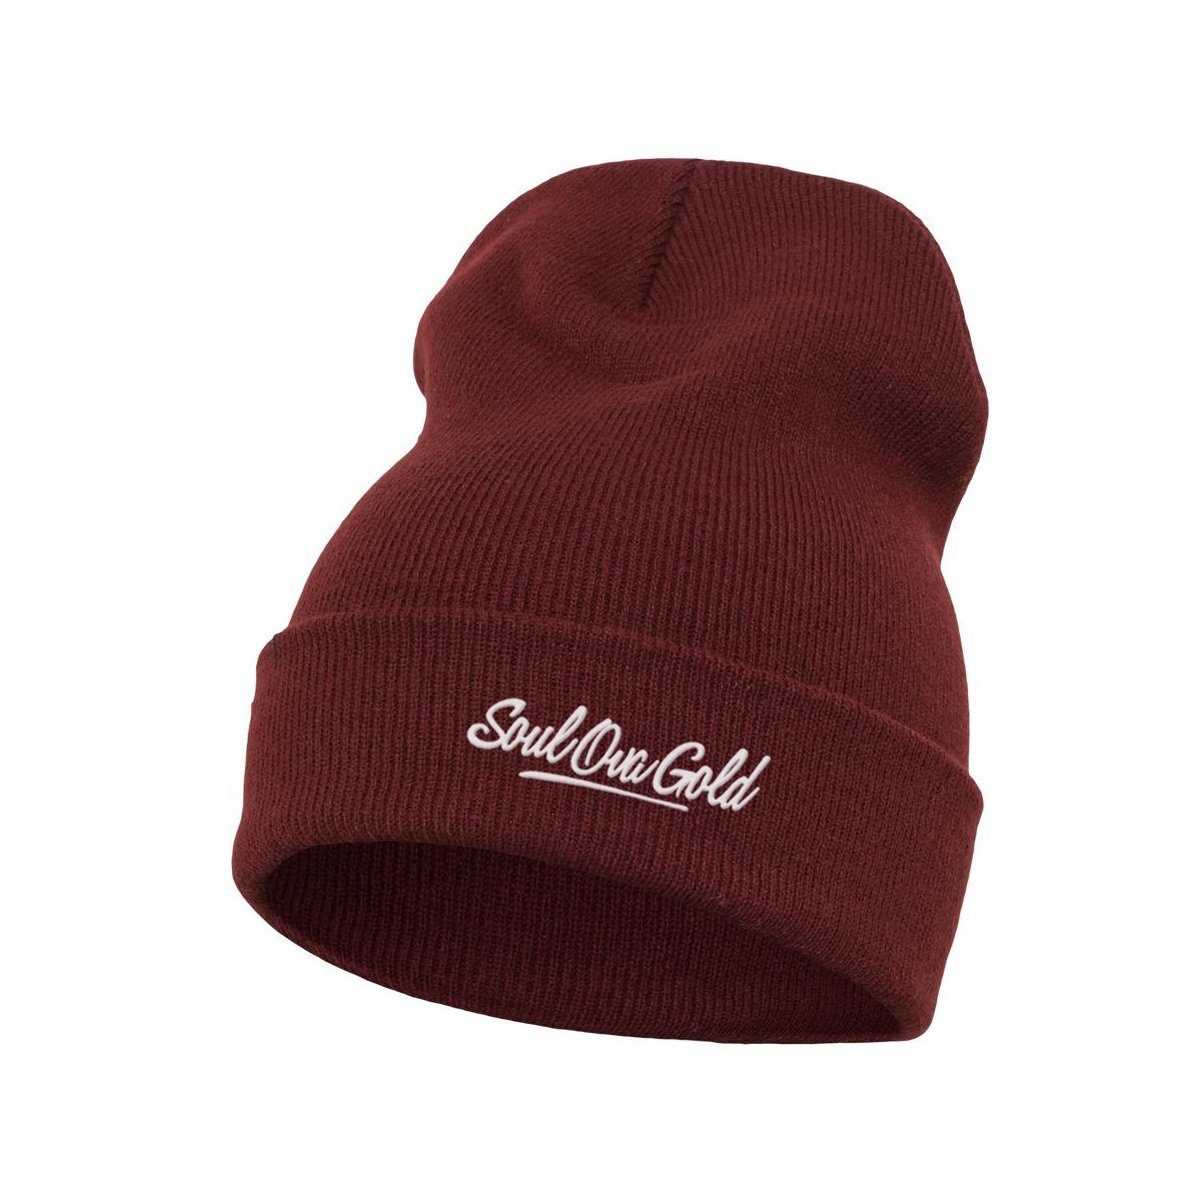 Soul Ova Gold Beanies Stick To The Script Embroidered Beanie (Maroon)